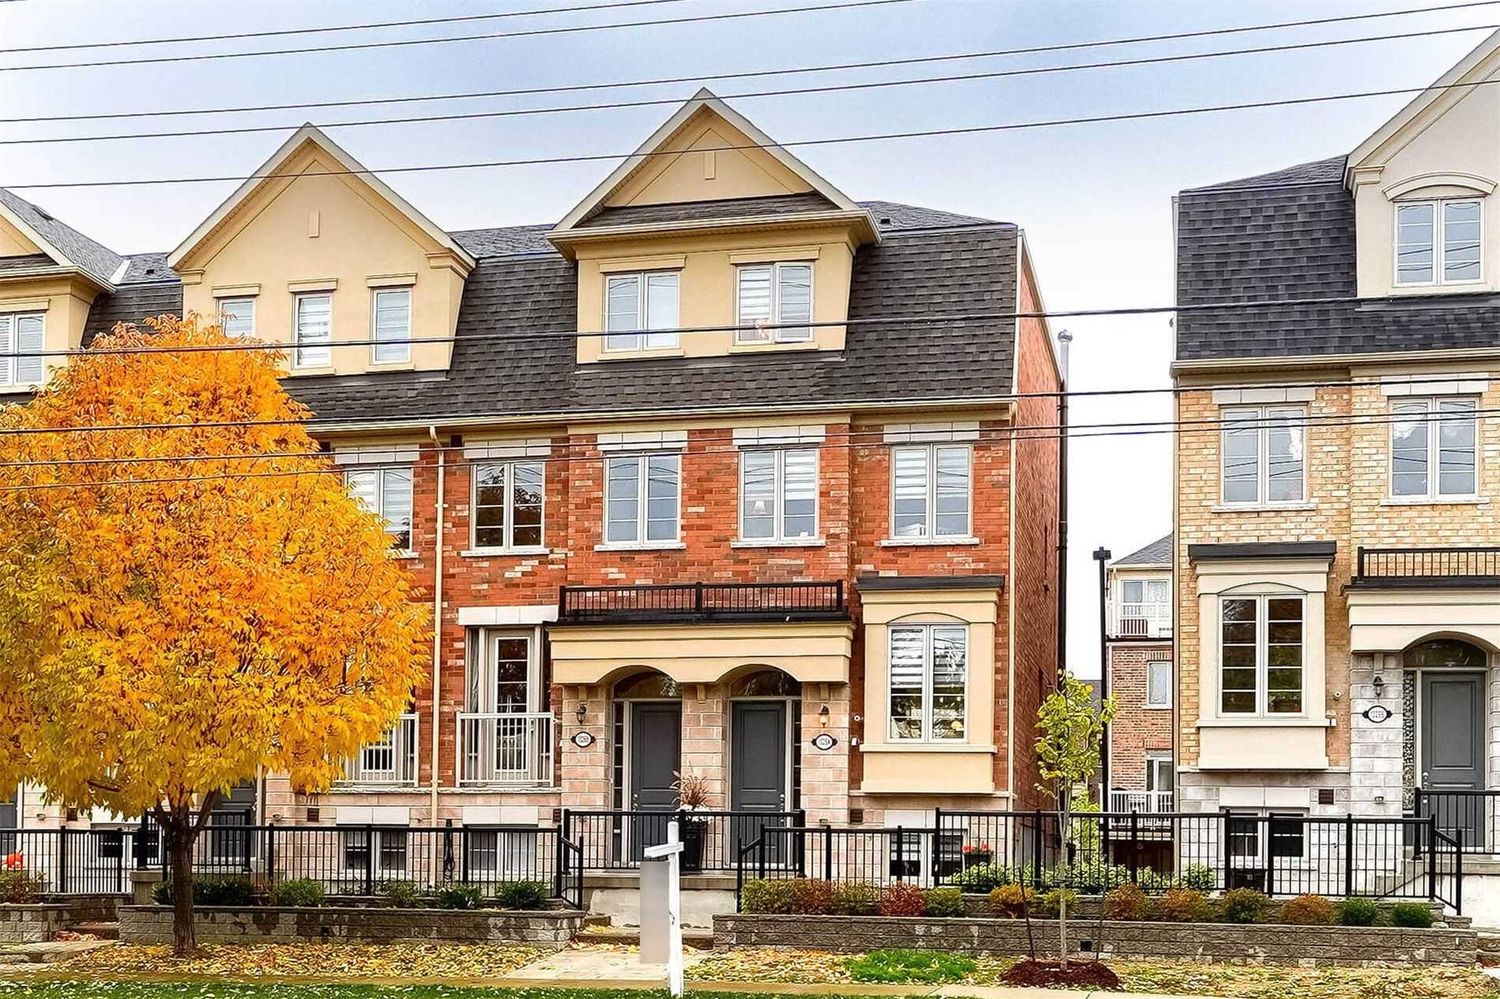 135-193 Norseman Street. Westhaven On Islington Townhomes is located in  Etobicoke, Toronto - image #3 of 3